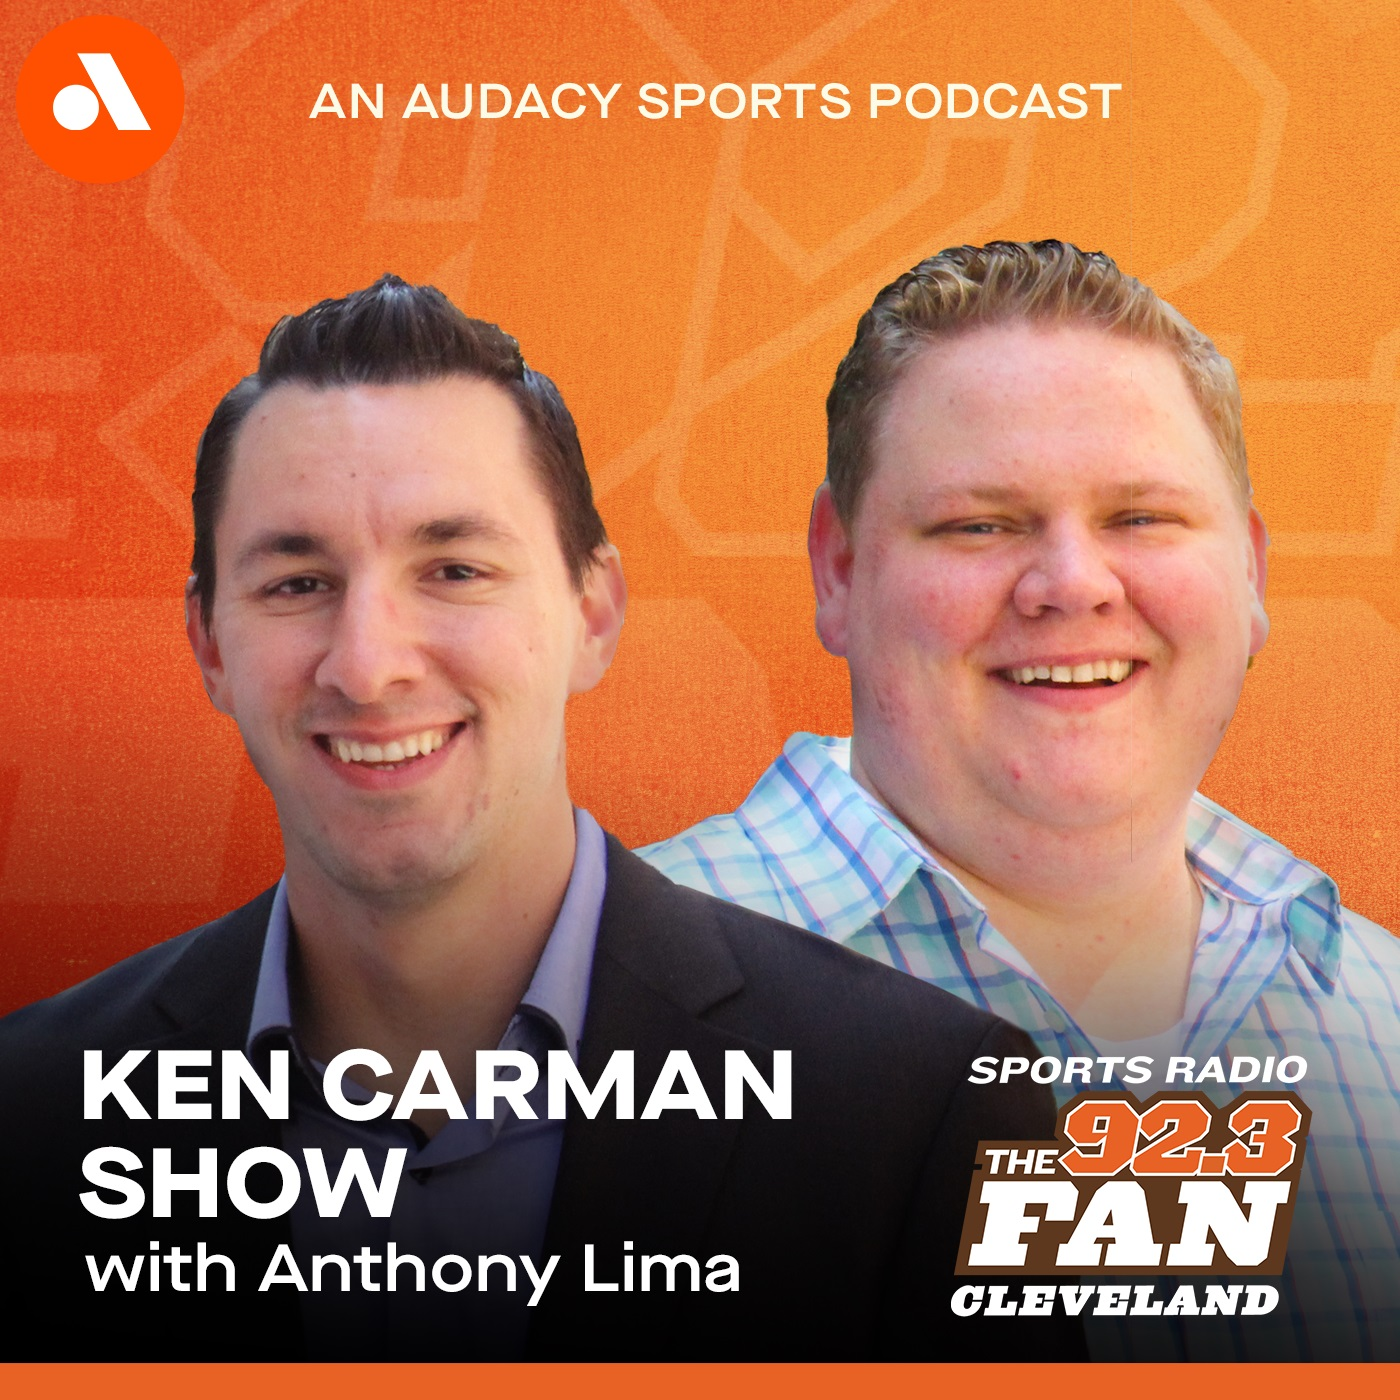 The Ken Carman Show with Anthony Lima: 7 in Heaven - Bengals are the real deal